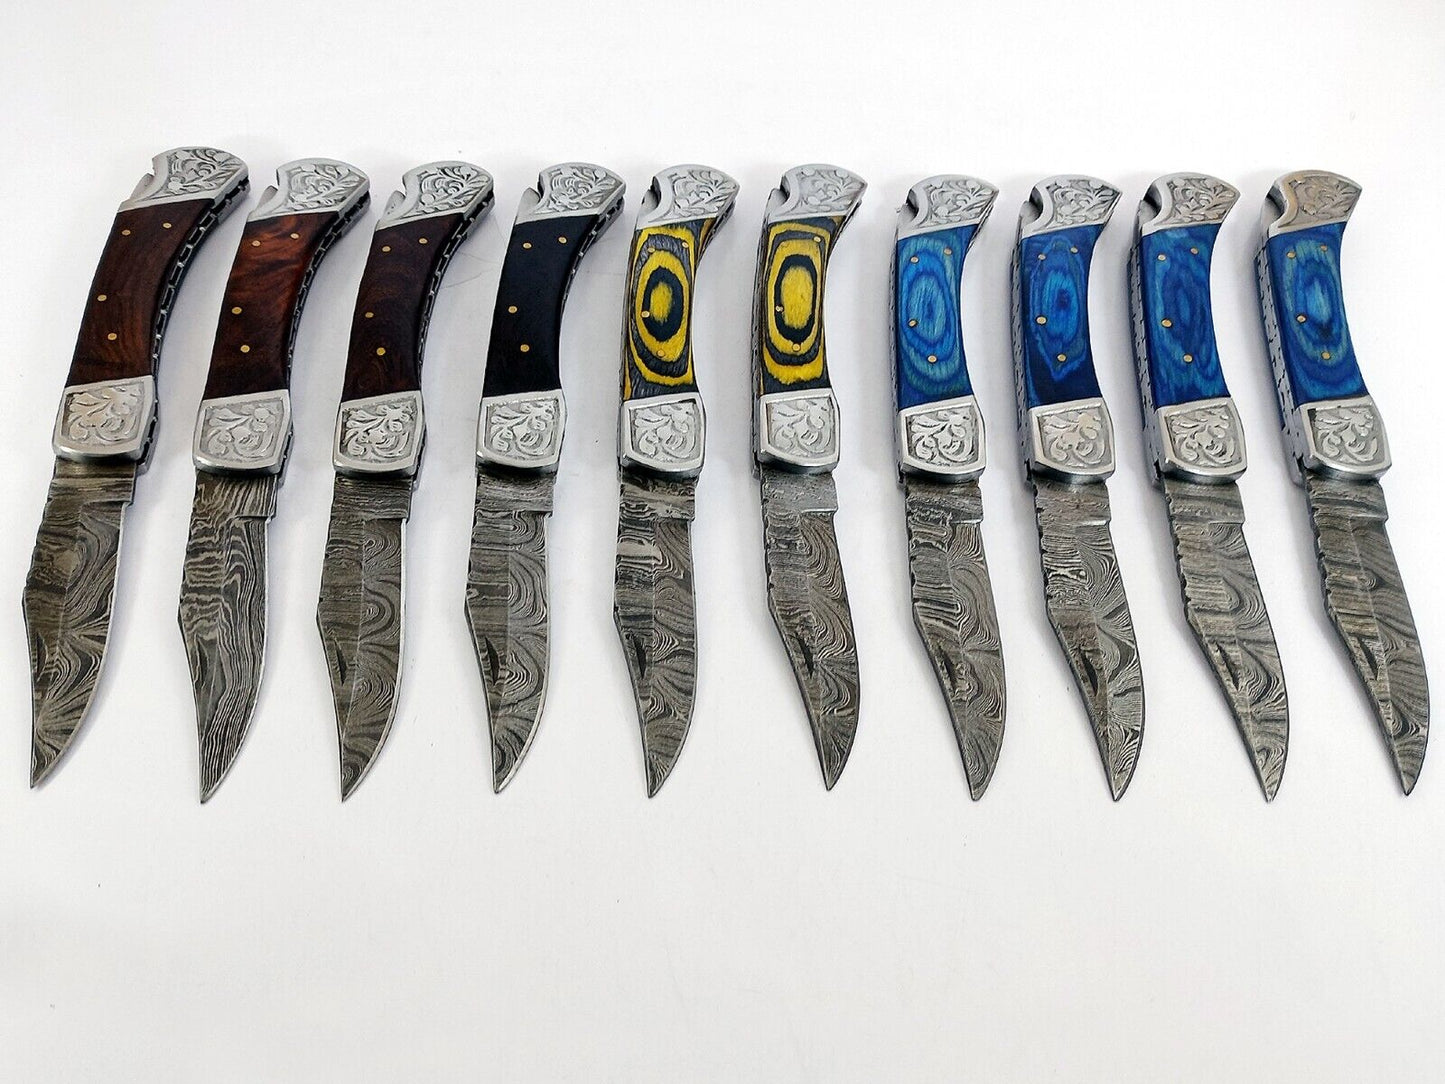 20 pieces lot of Damascus steel Back lock folding knife with Leather Sheath, Assorted color scales